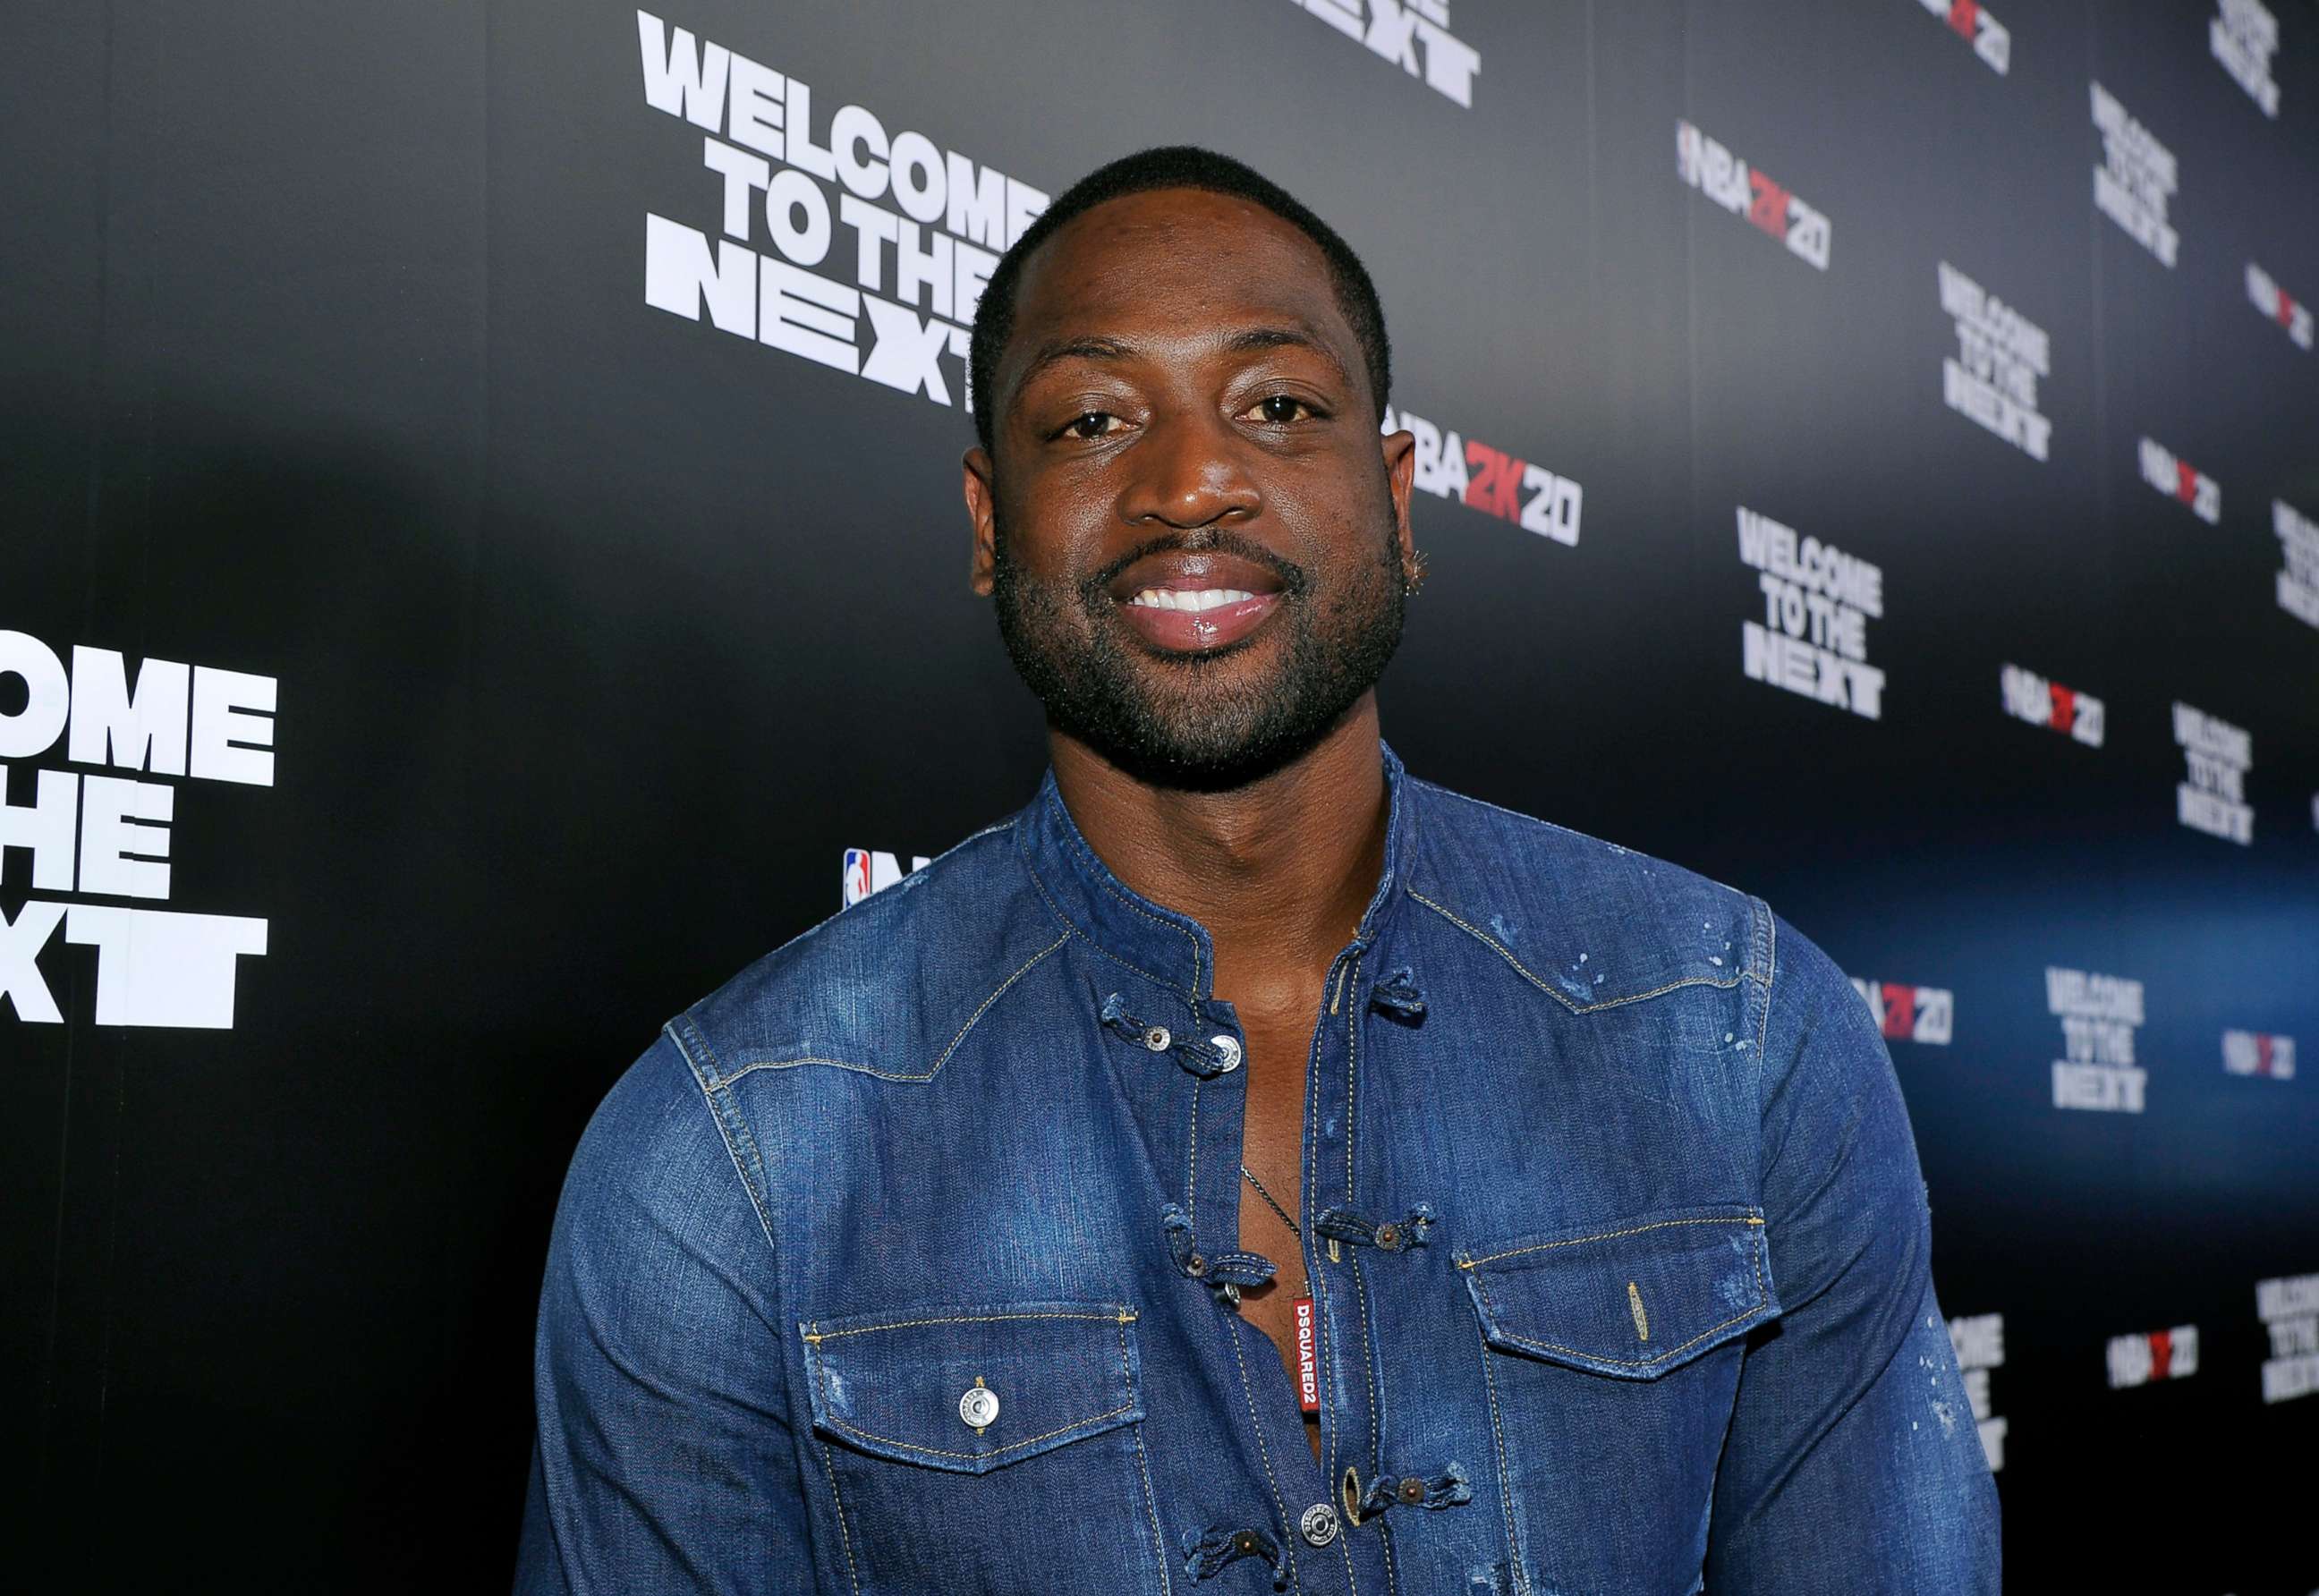 PHOTO: Dwyane Wade attends the NBA 2K20: Welcome to the Next, Sept. 5, 2019, in Los Angeles.